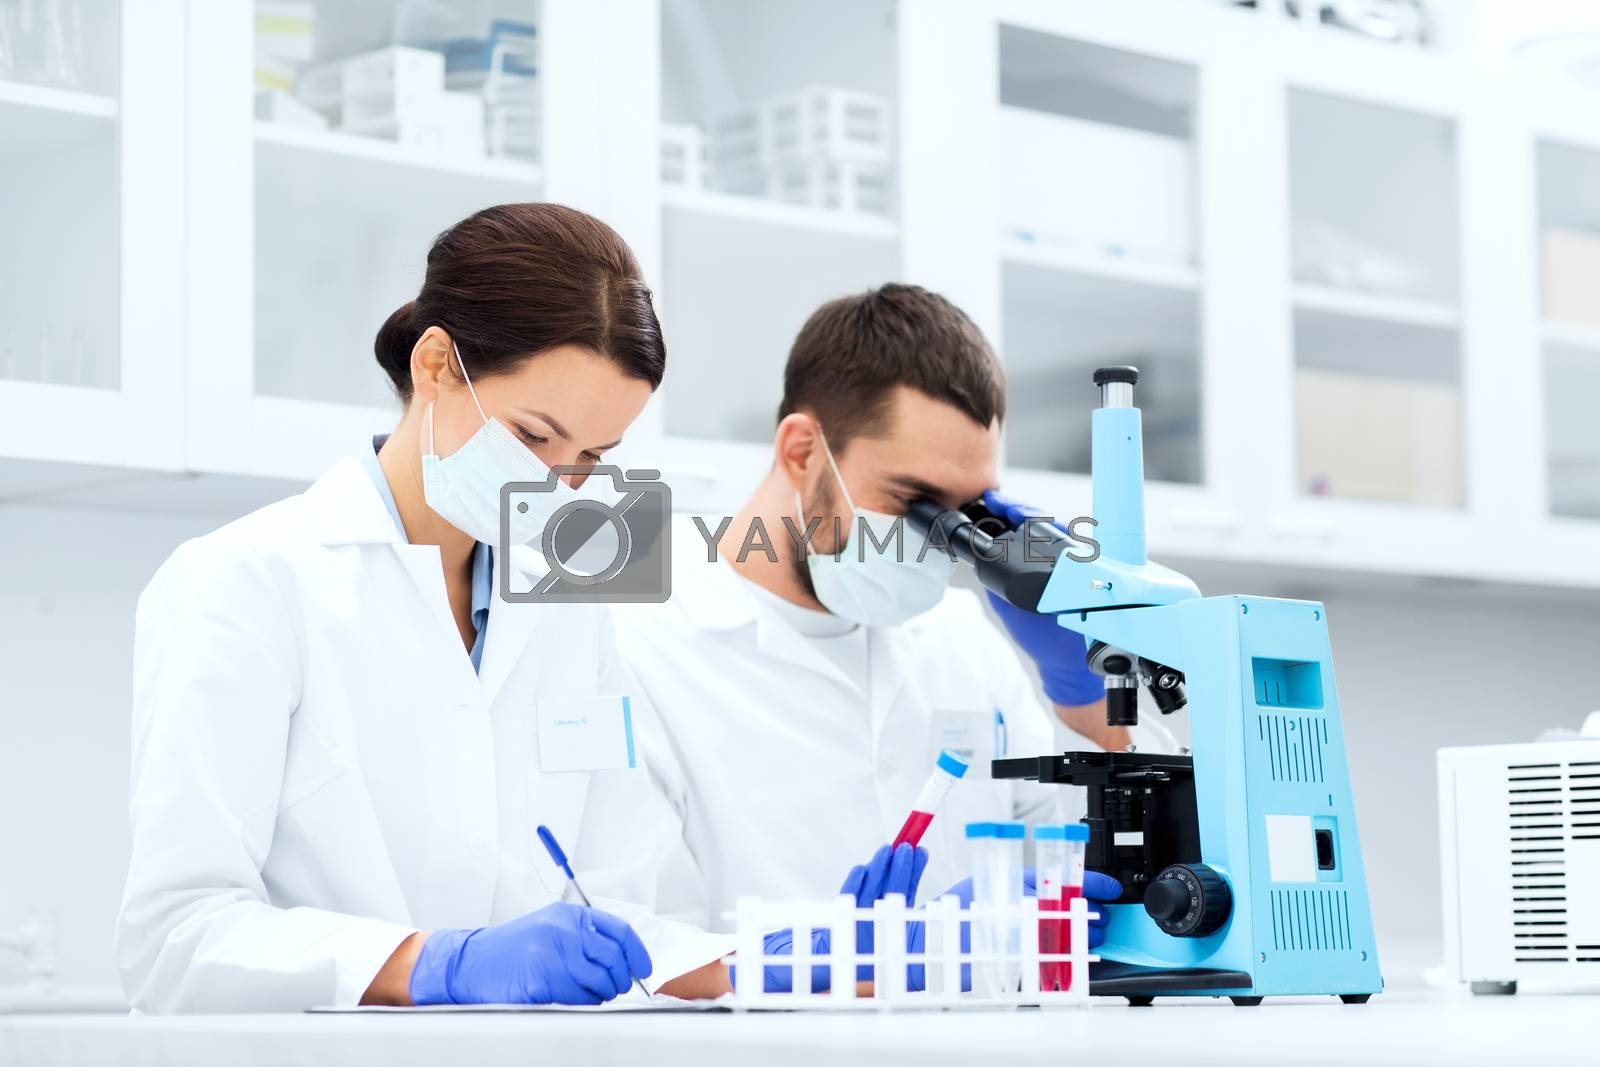 Royalty free image of scientists with clipboard and microscope in lab by dolgachov